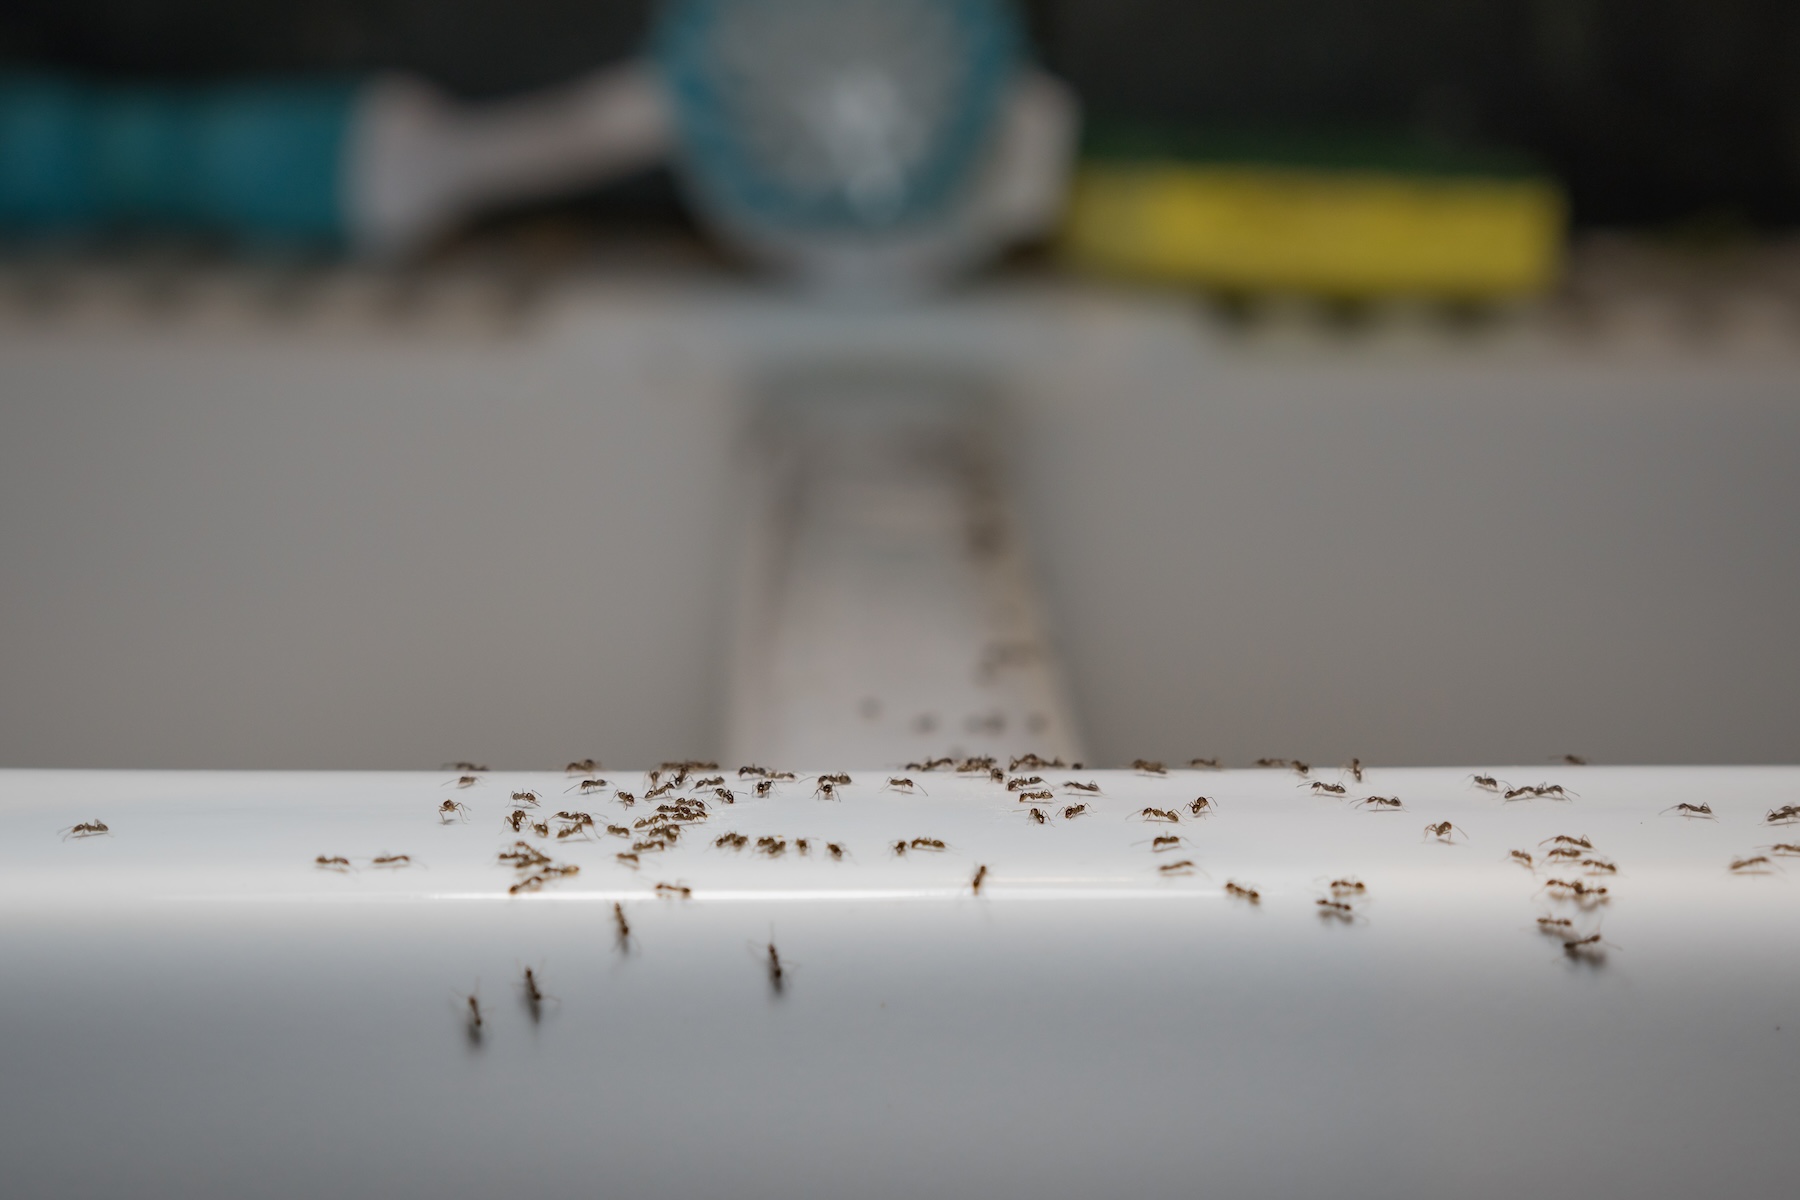 How To Get Rid Of Ants In Your Kitchen